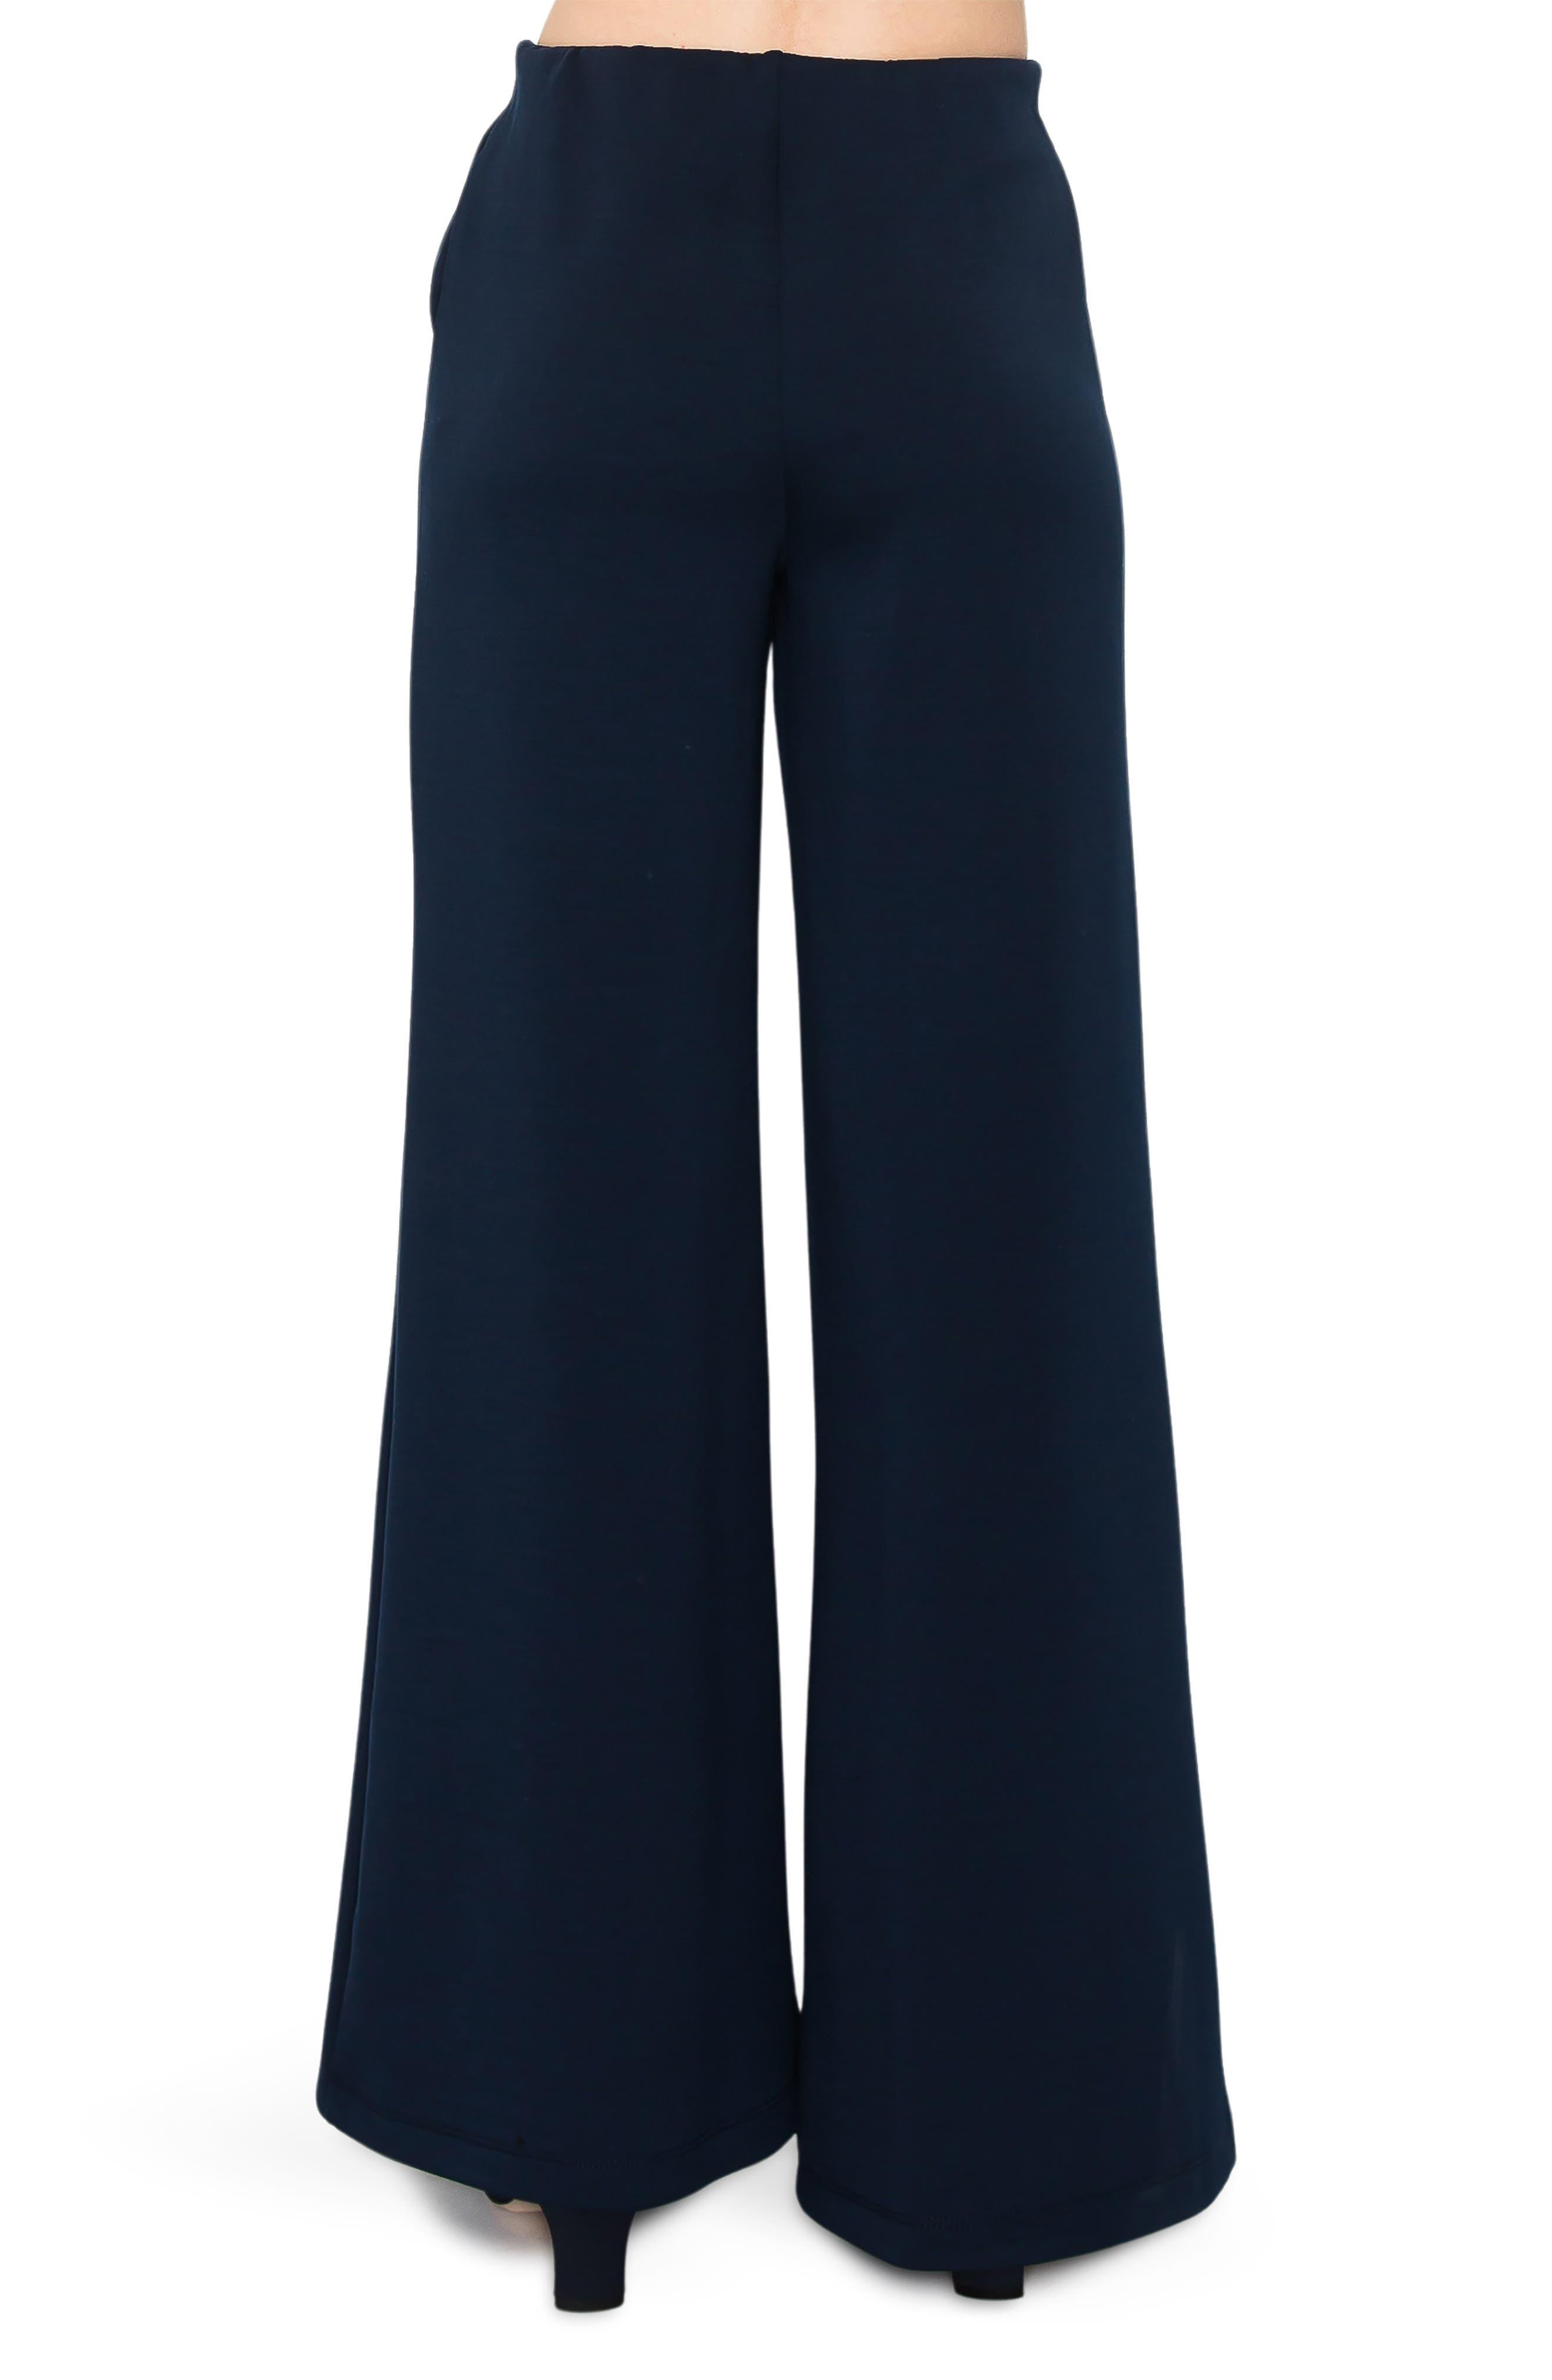 MELLODAY Ponte Wide Leg Pull-on Pants in Blue